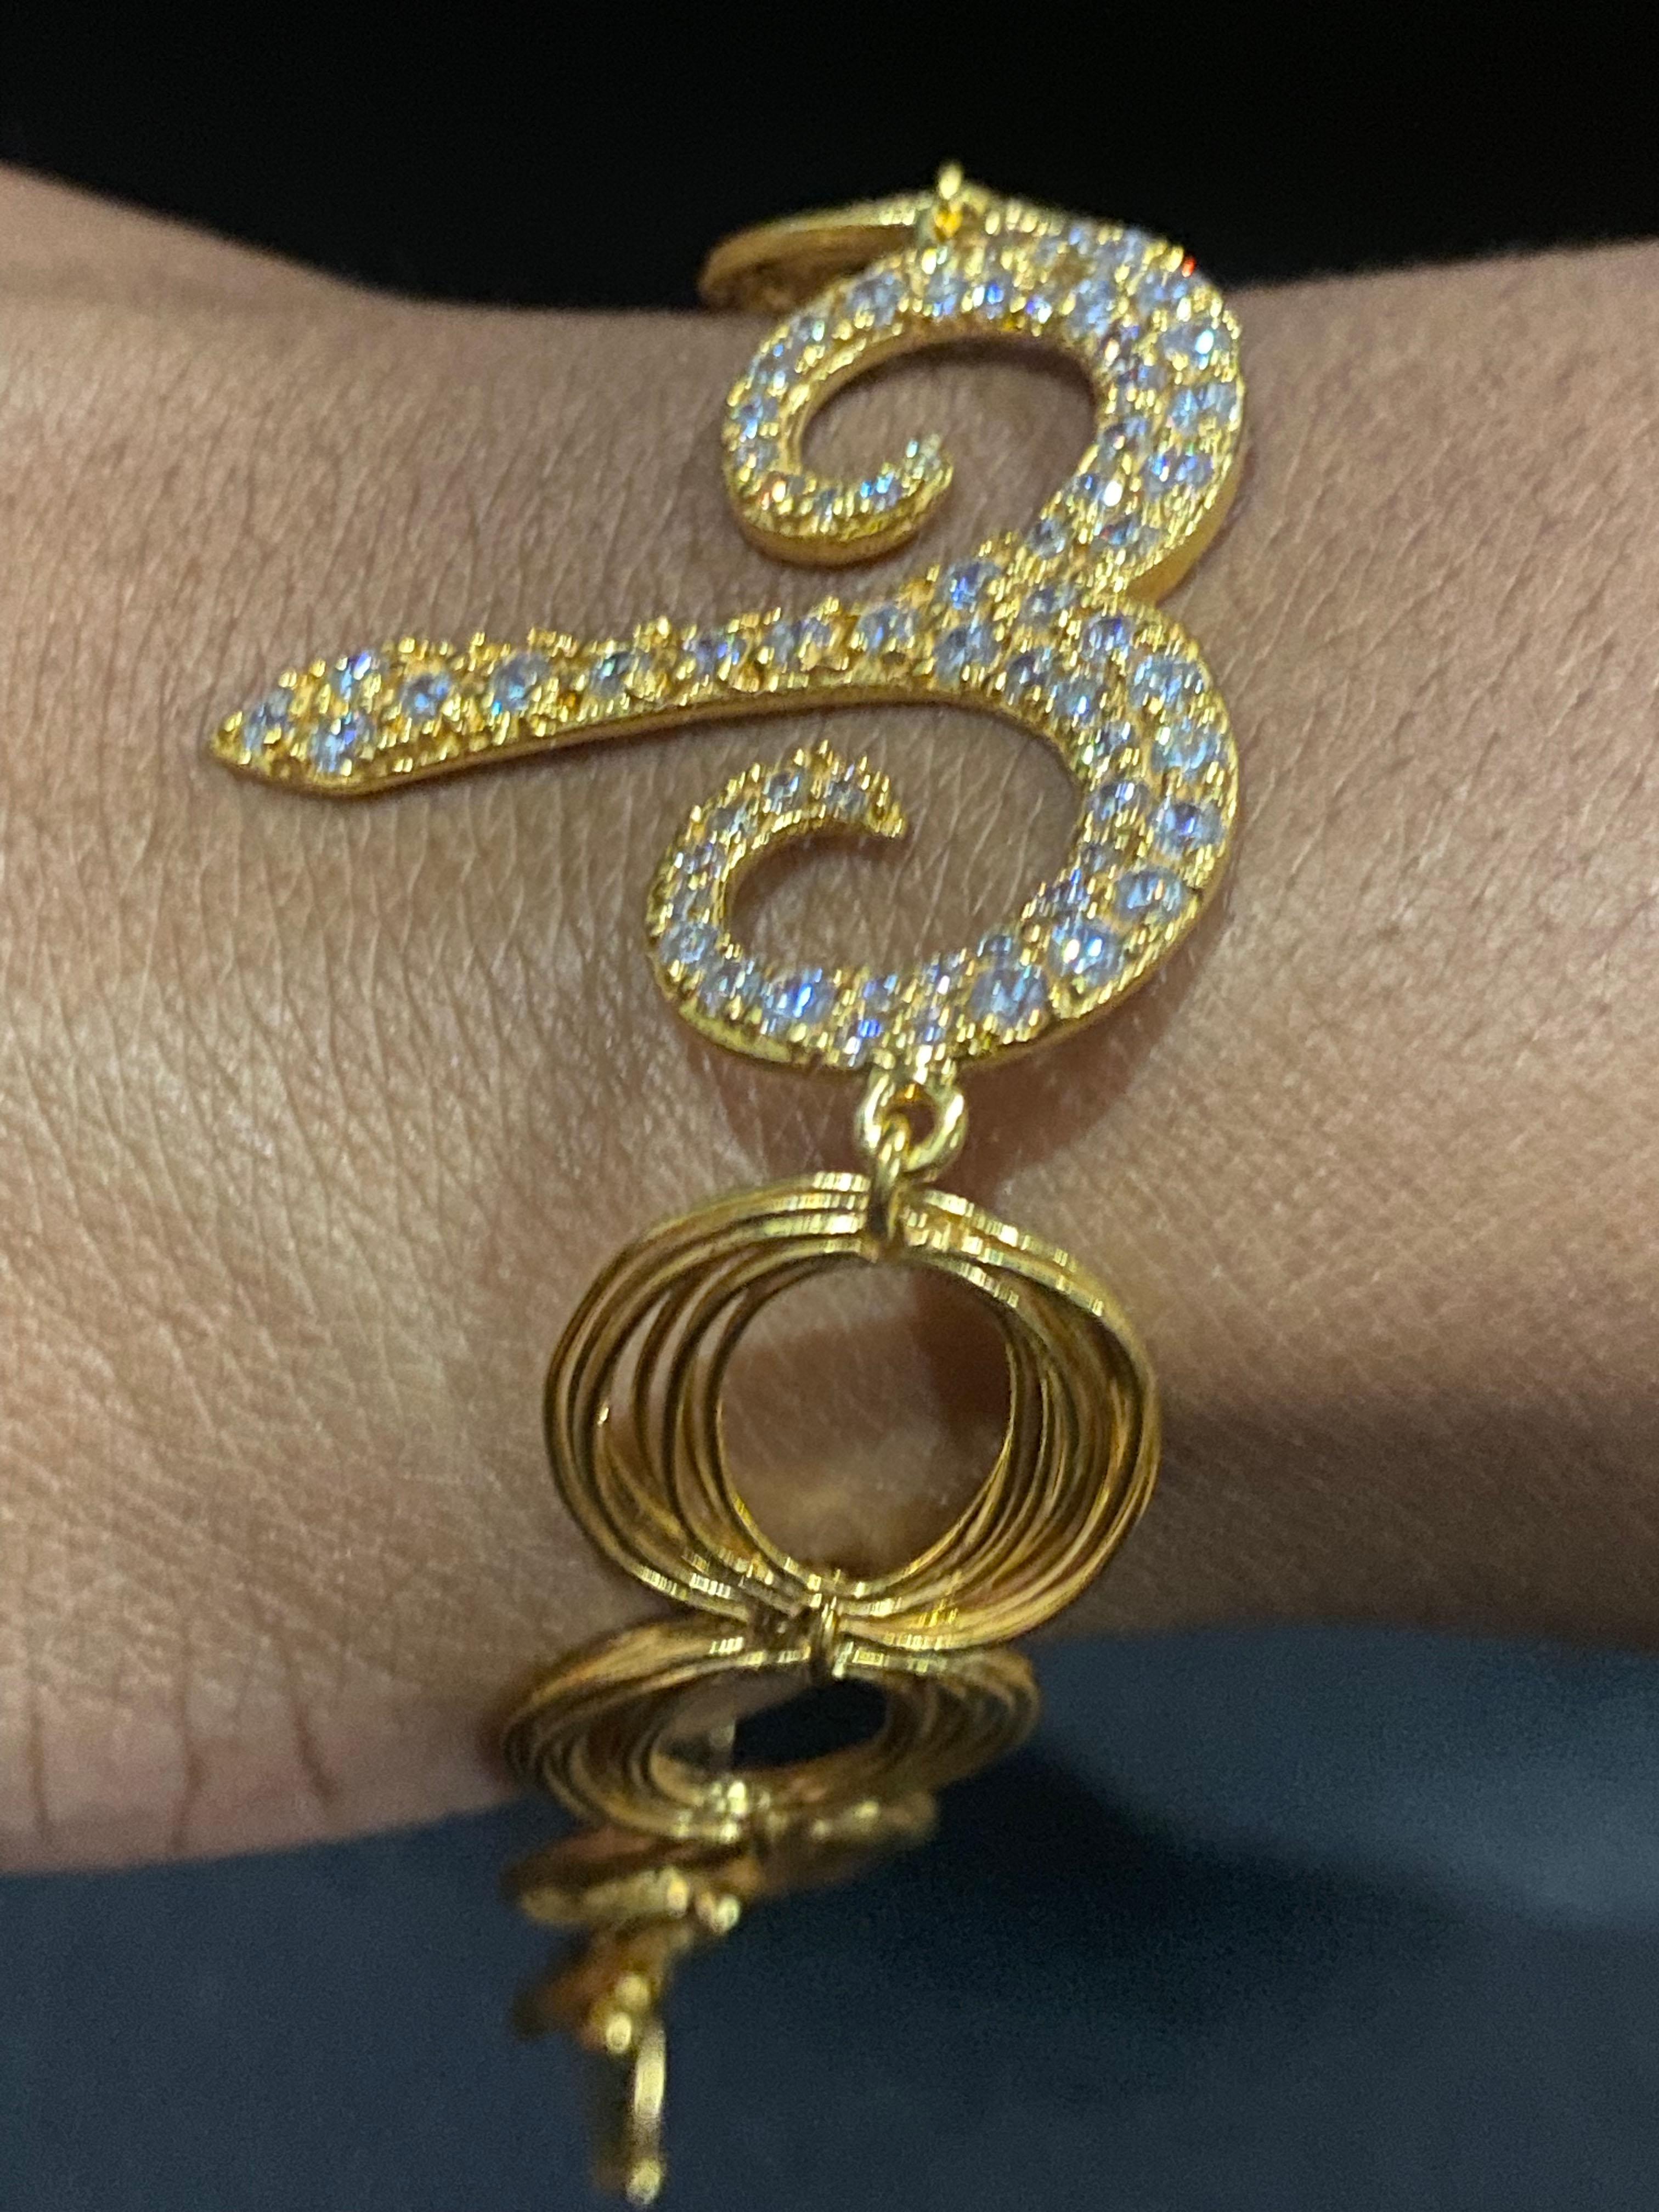 Add some sparkle to your jewelry collection with this stylish zodiac bracelet featuring the Aries symbol and links inspired by the Tibisiri straw. Those born during the month of April are known for being passionate and hardworking and deserve this